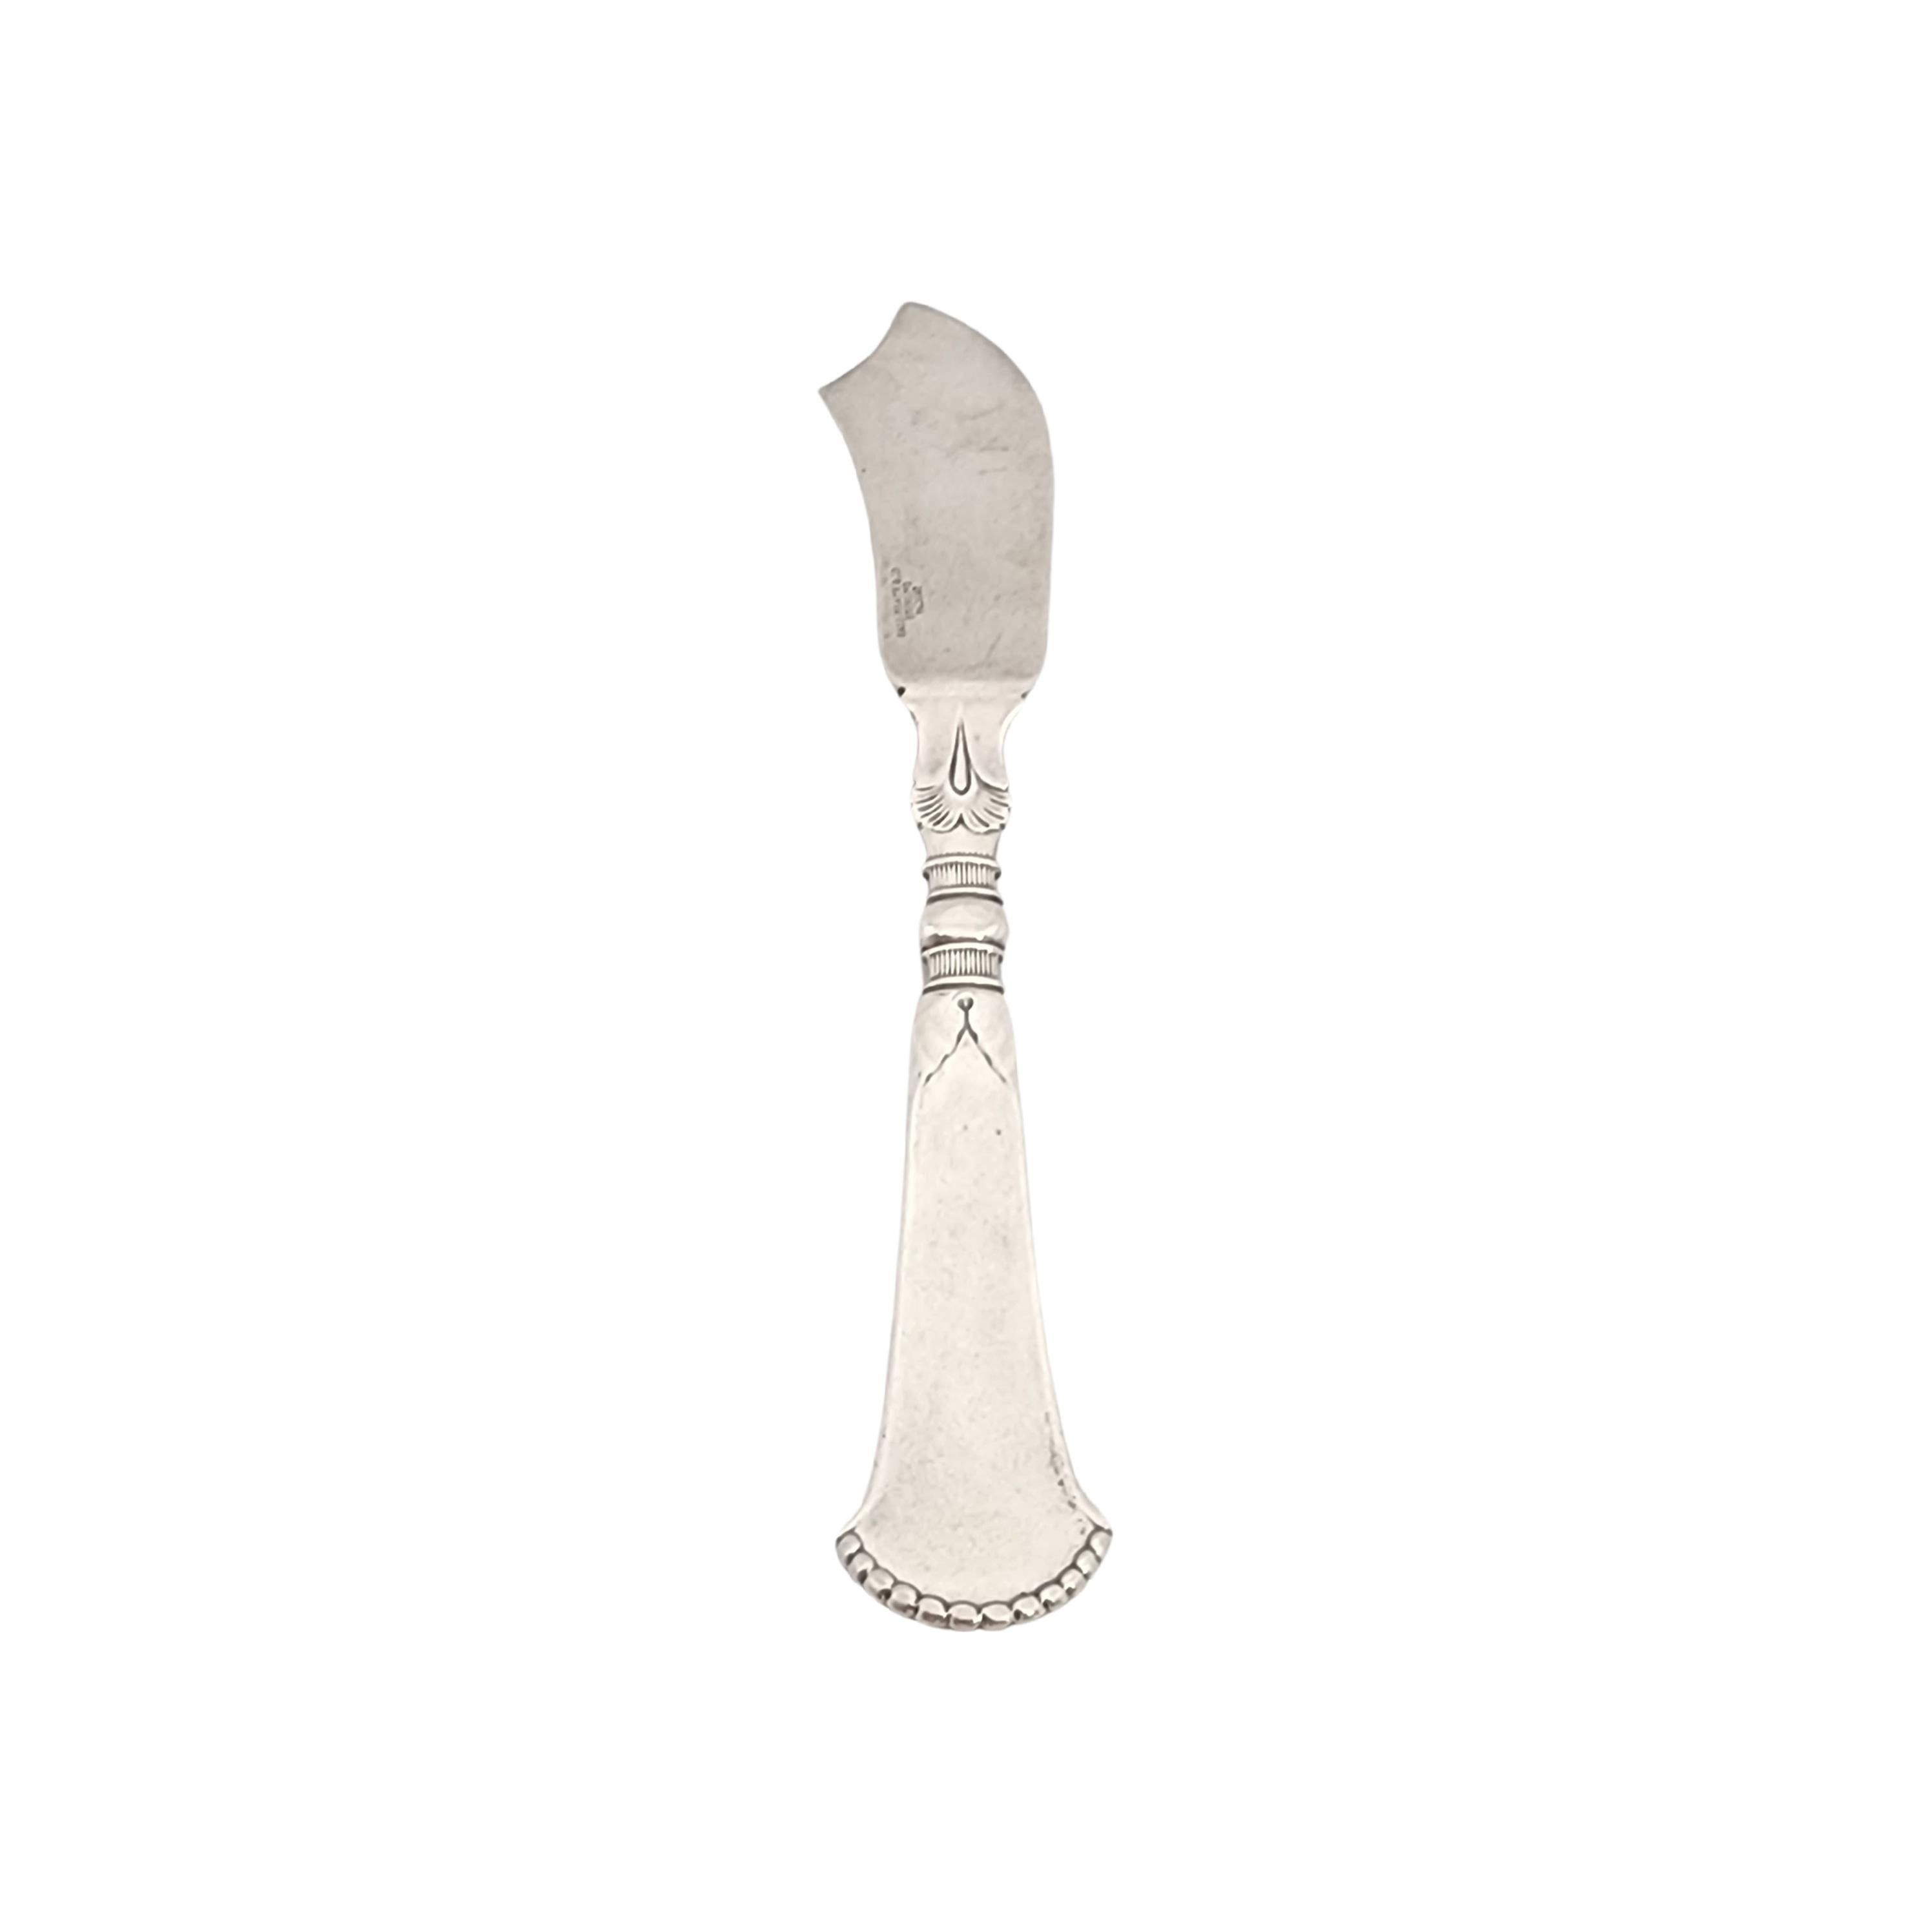 Sterling silver master butter knife in the Osiris pattern by John Wendt for Ball Black & Co.

No monogram

The Osiris pattern features a lined handle with a fan edge, designed by John Wendt, circa 1870.  This master butter knife features a beautiful